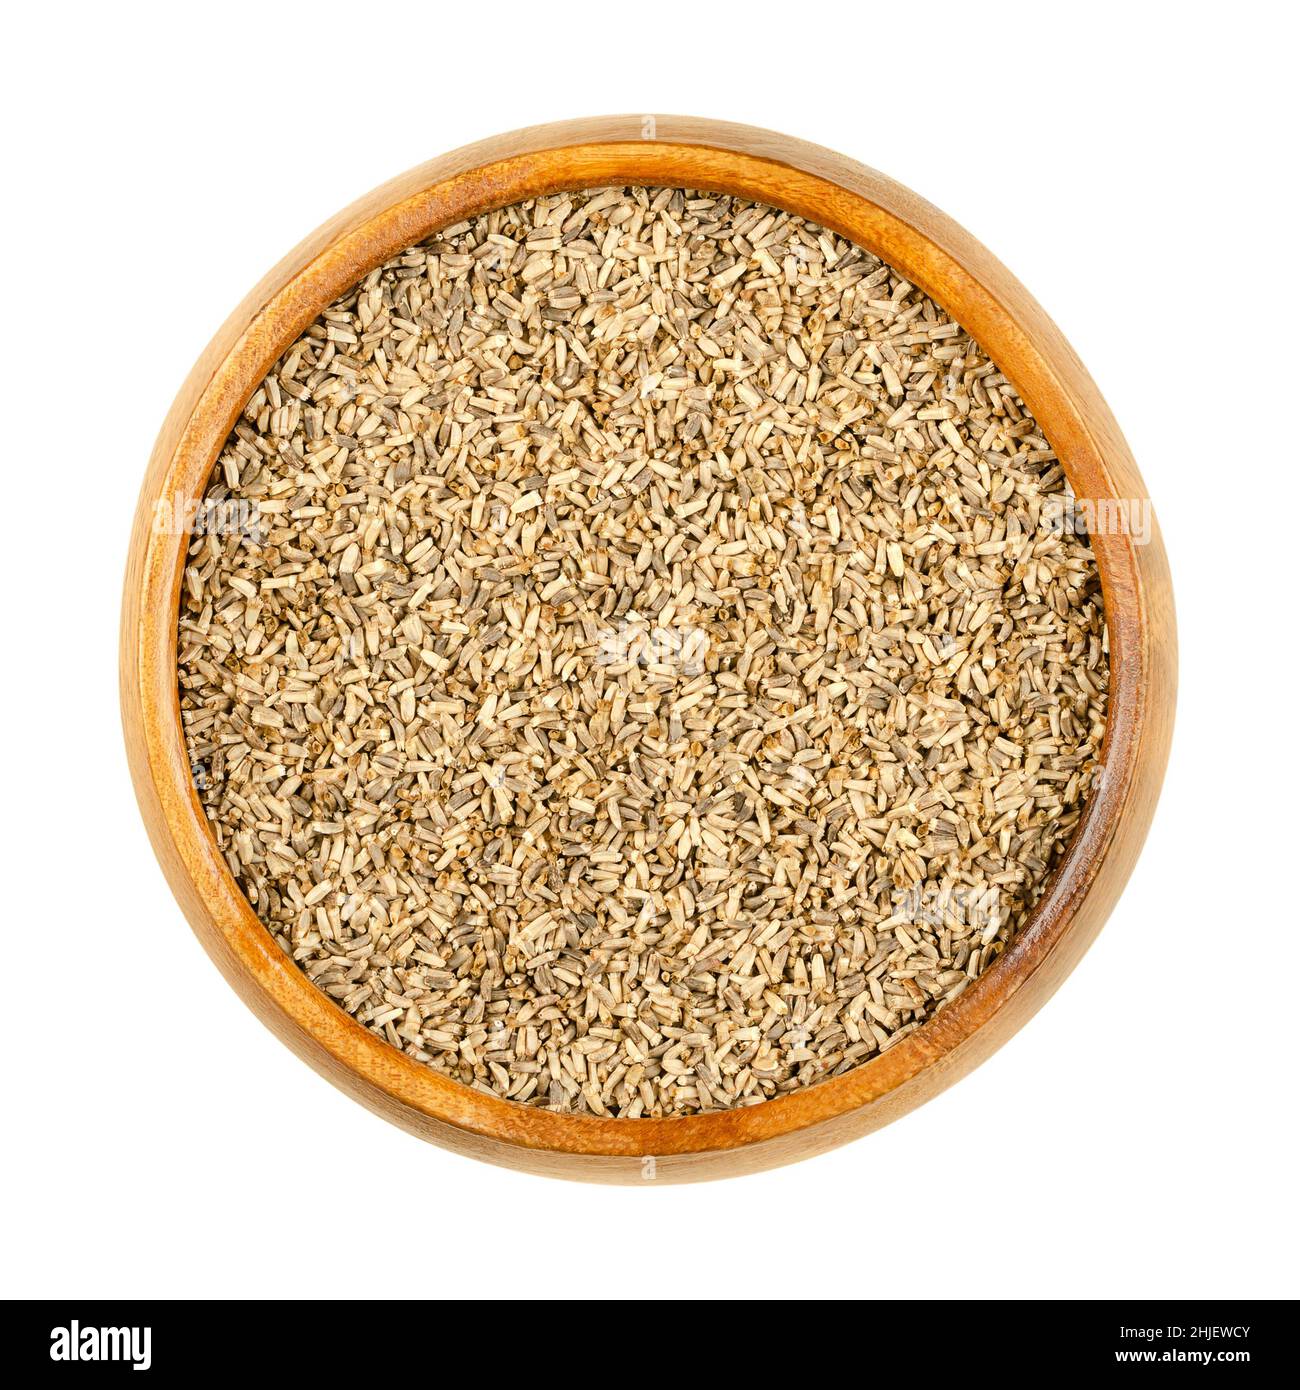 Common chicory seeds, in a wooden bowl. Cichorium intybus, plant of daisy family Asteraceae, with blue flowers. Seeds for growing microgreens. Stock Photo